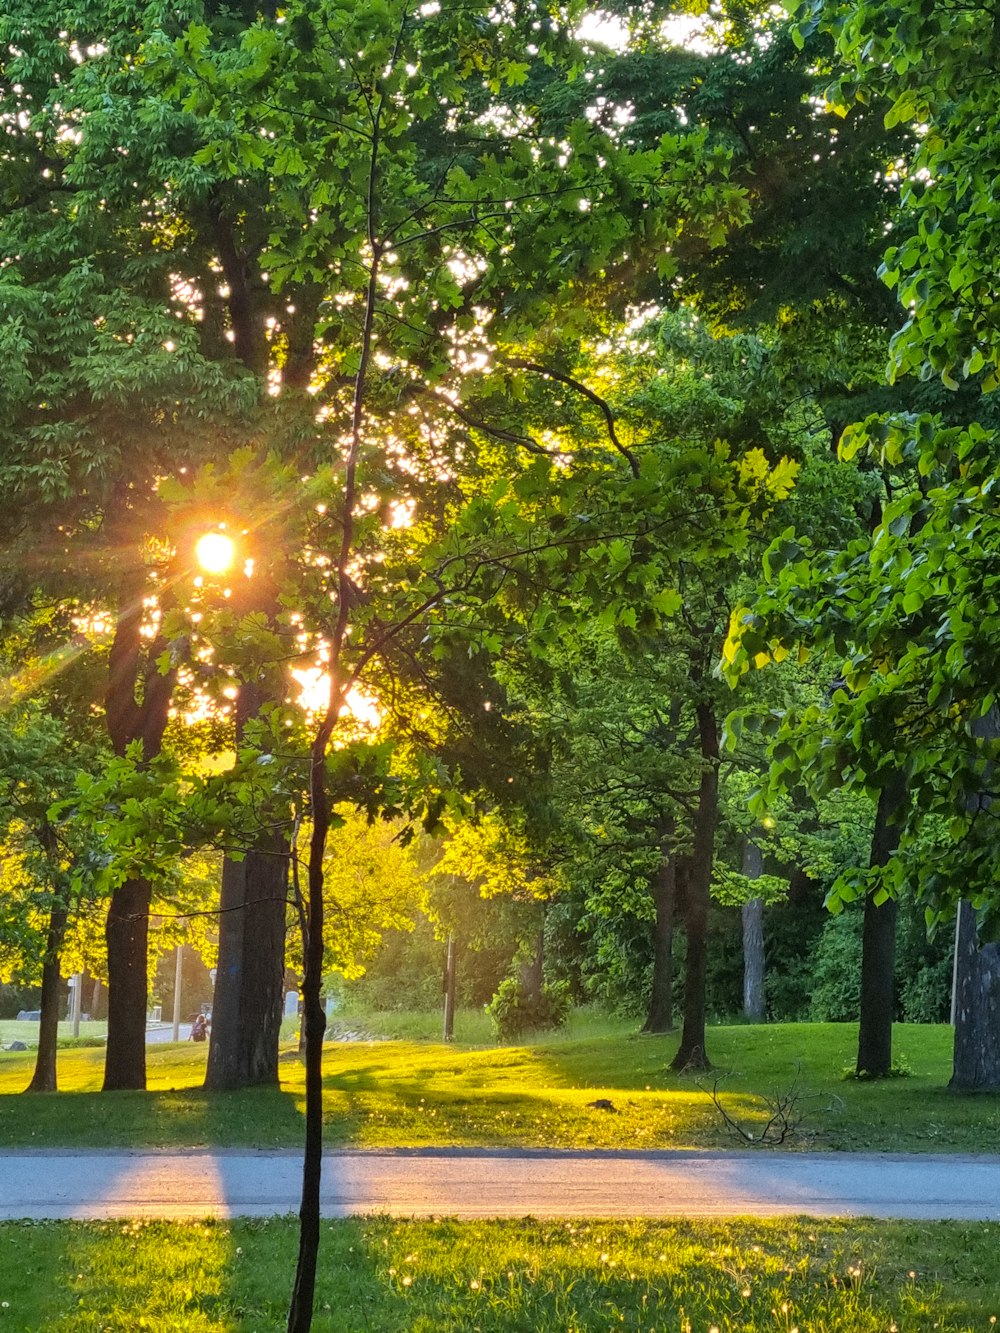 the sun is shining through the trees in the park